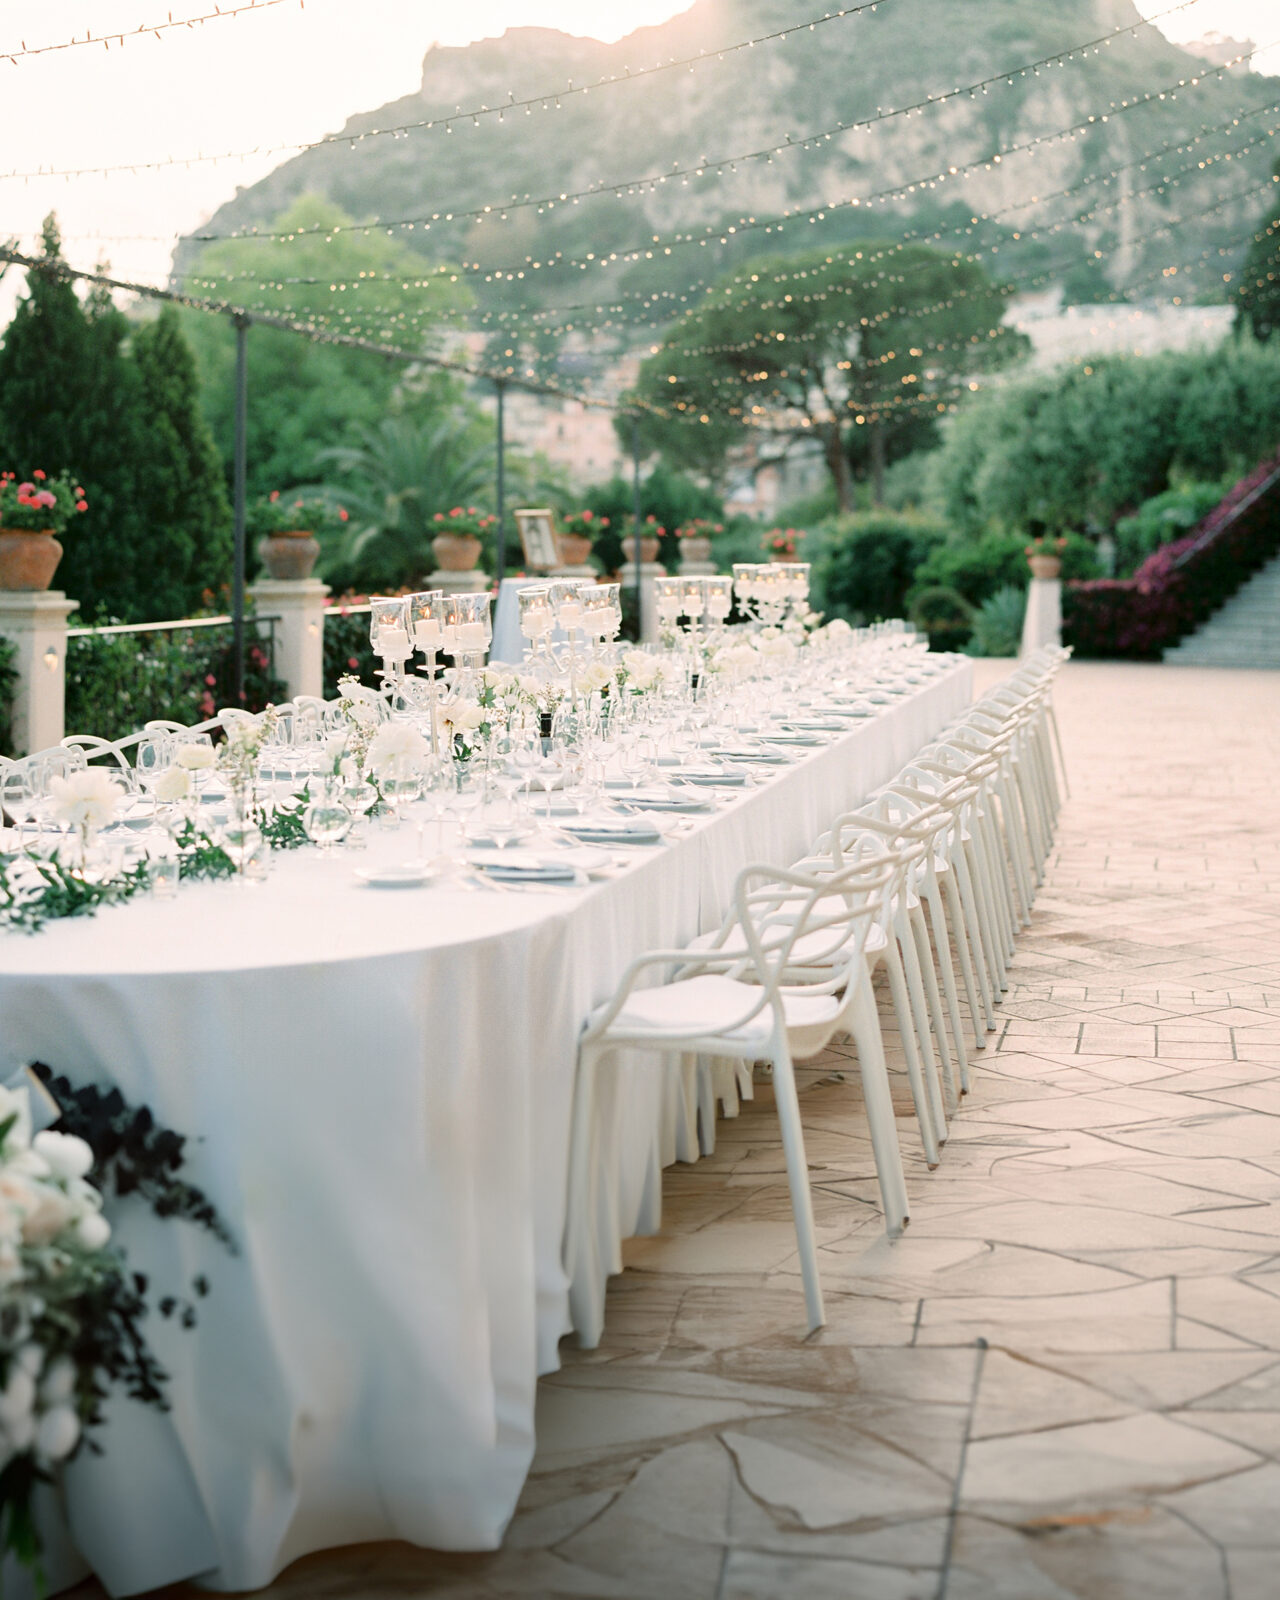 An elegantly set outdoor dining table with white chairs under twinkly lights, at the Grand Hotel Timeo Terazzo in Sicily.